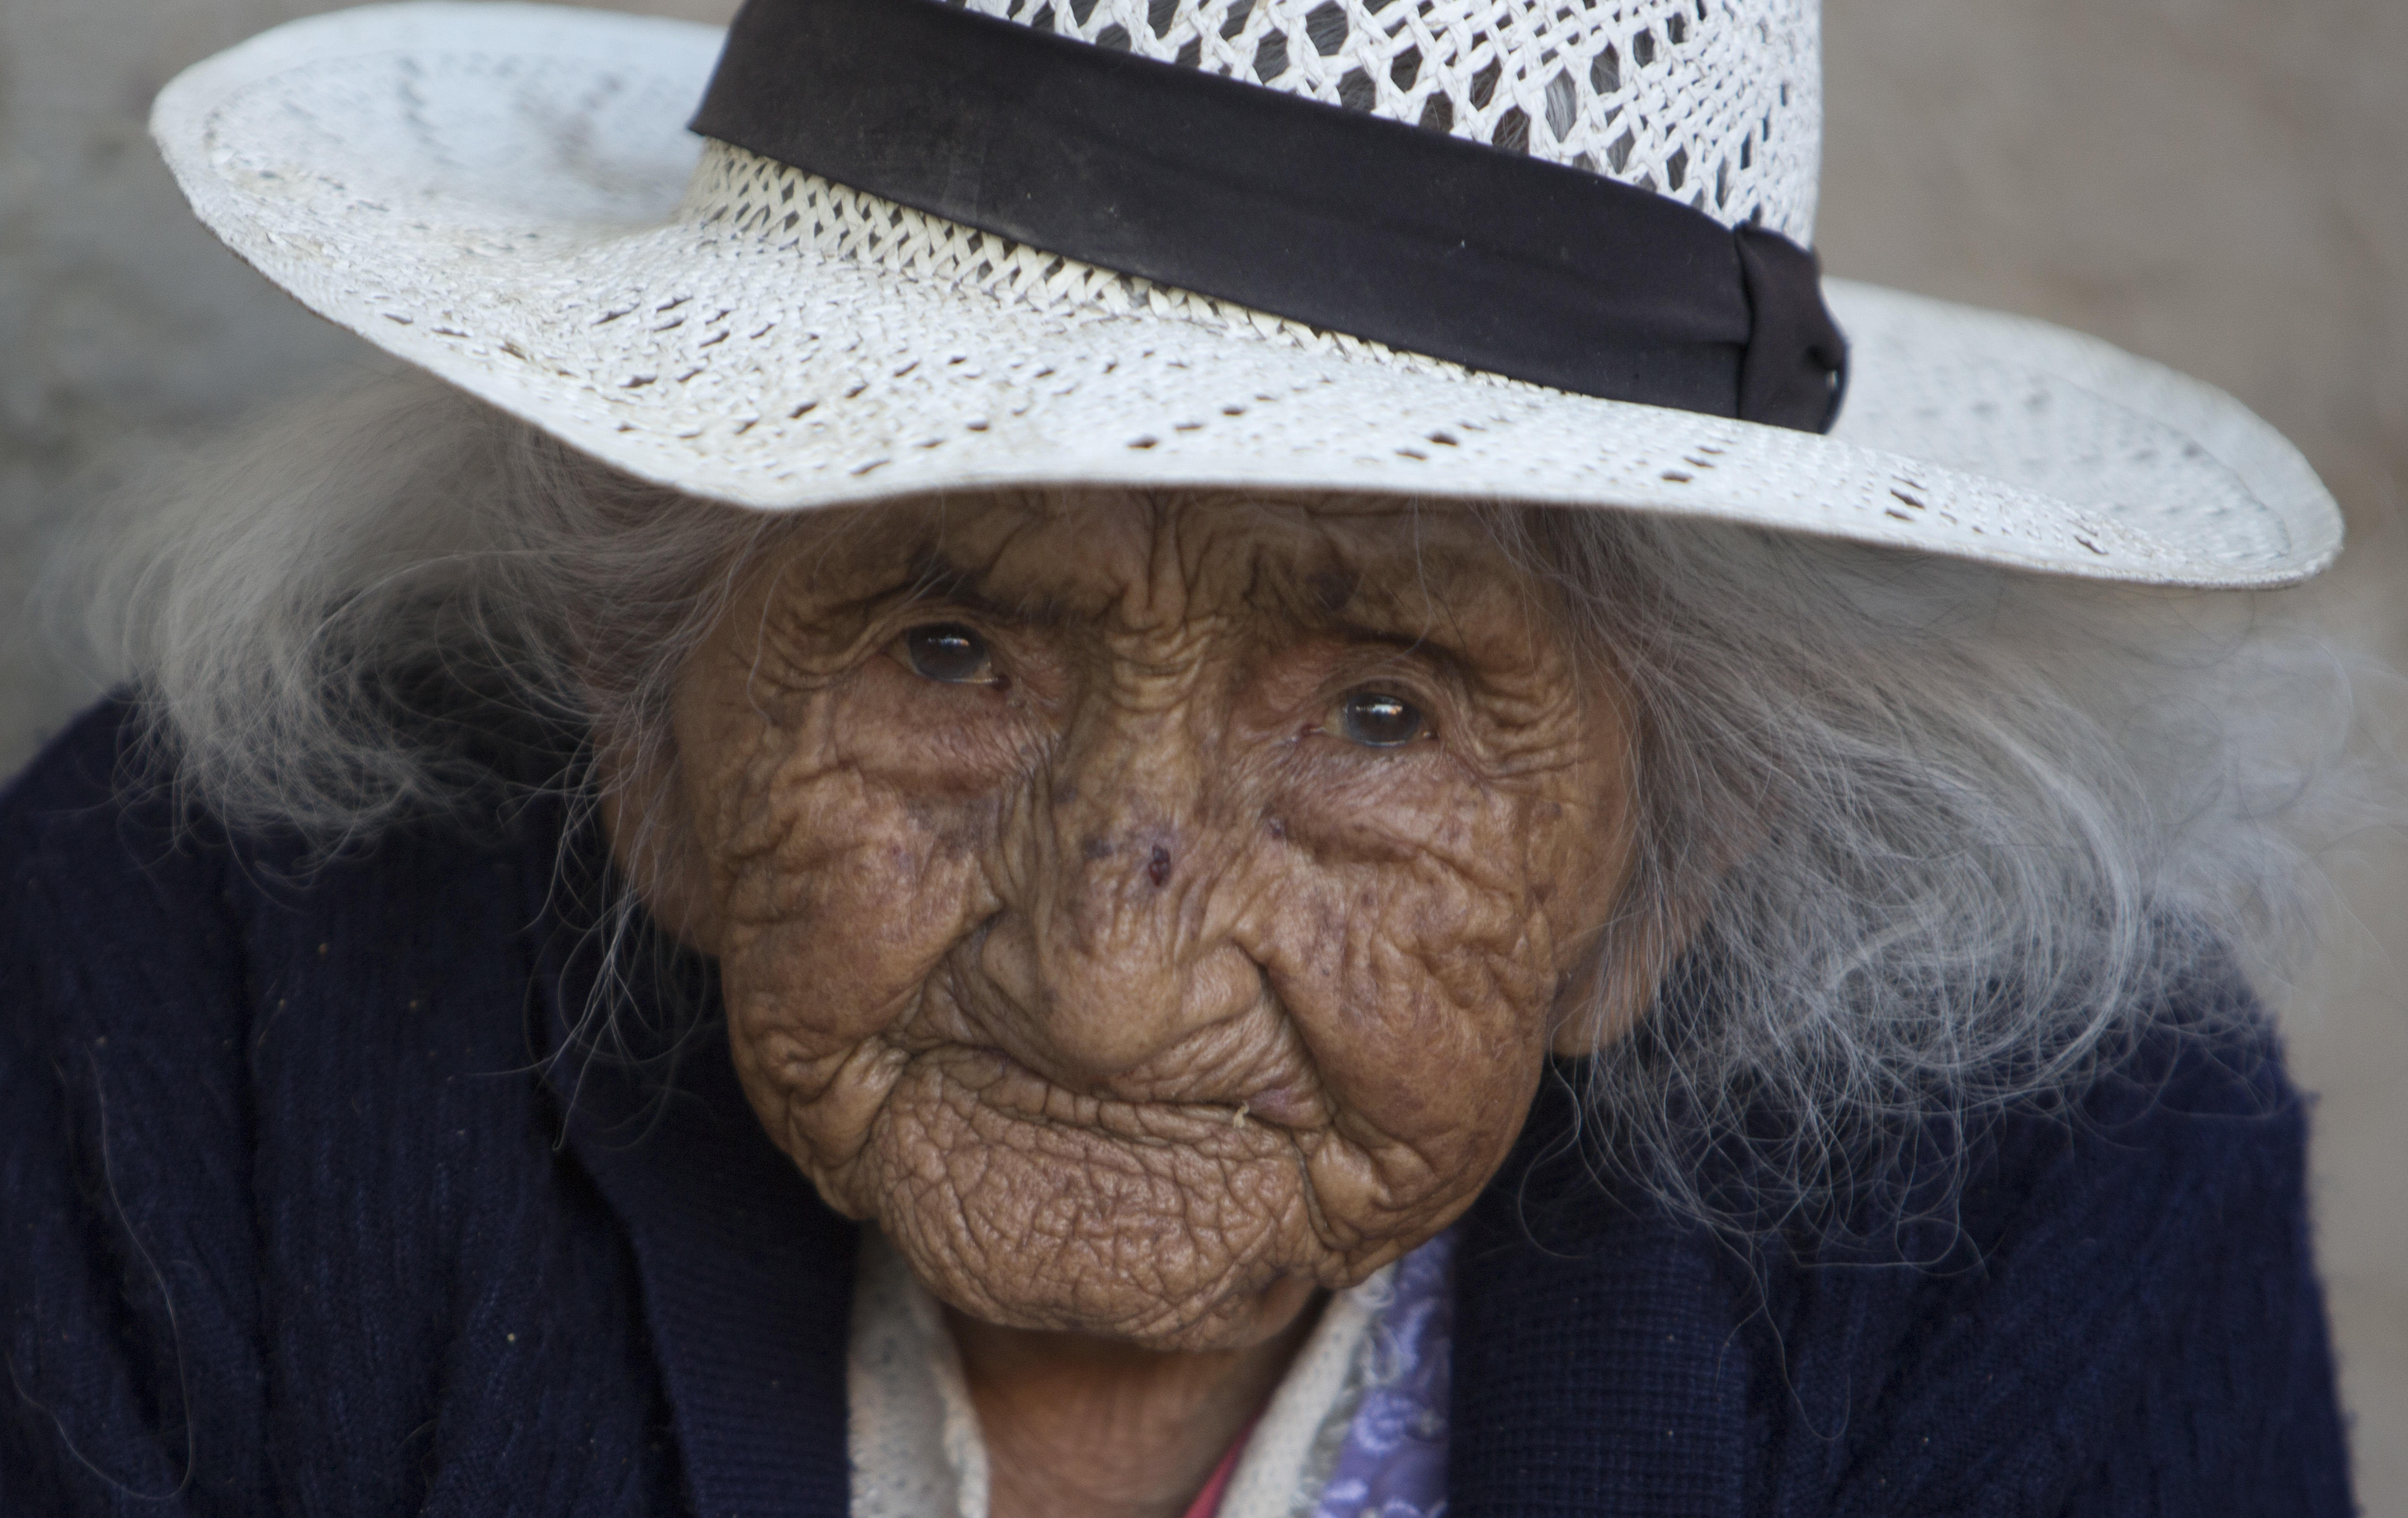 Bolivian Julia Flores Colque May Be Worlds Oldest Living Woman But Shes Never Heard Of